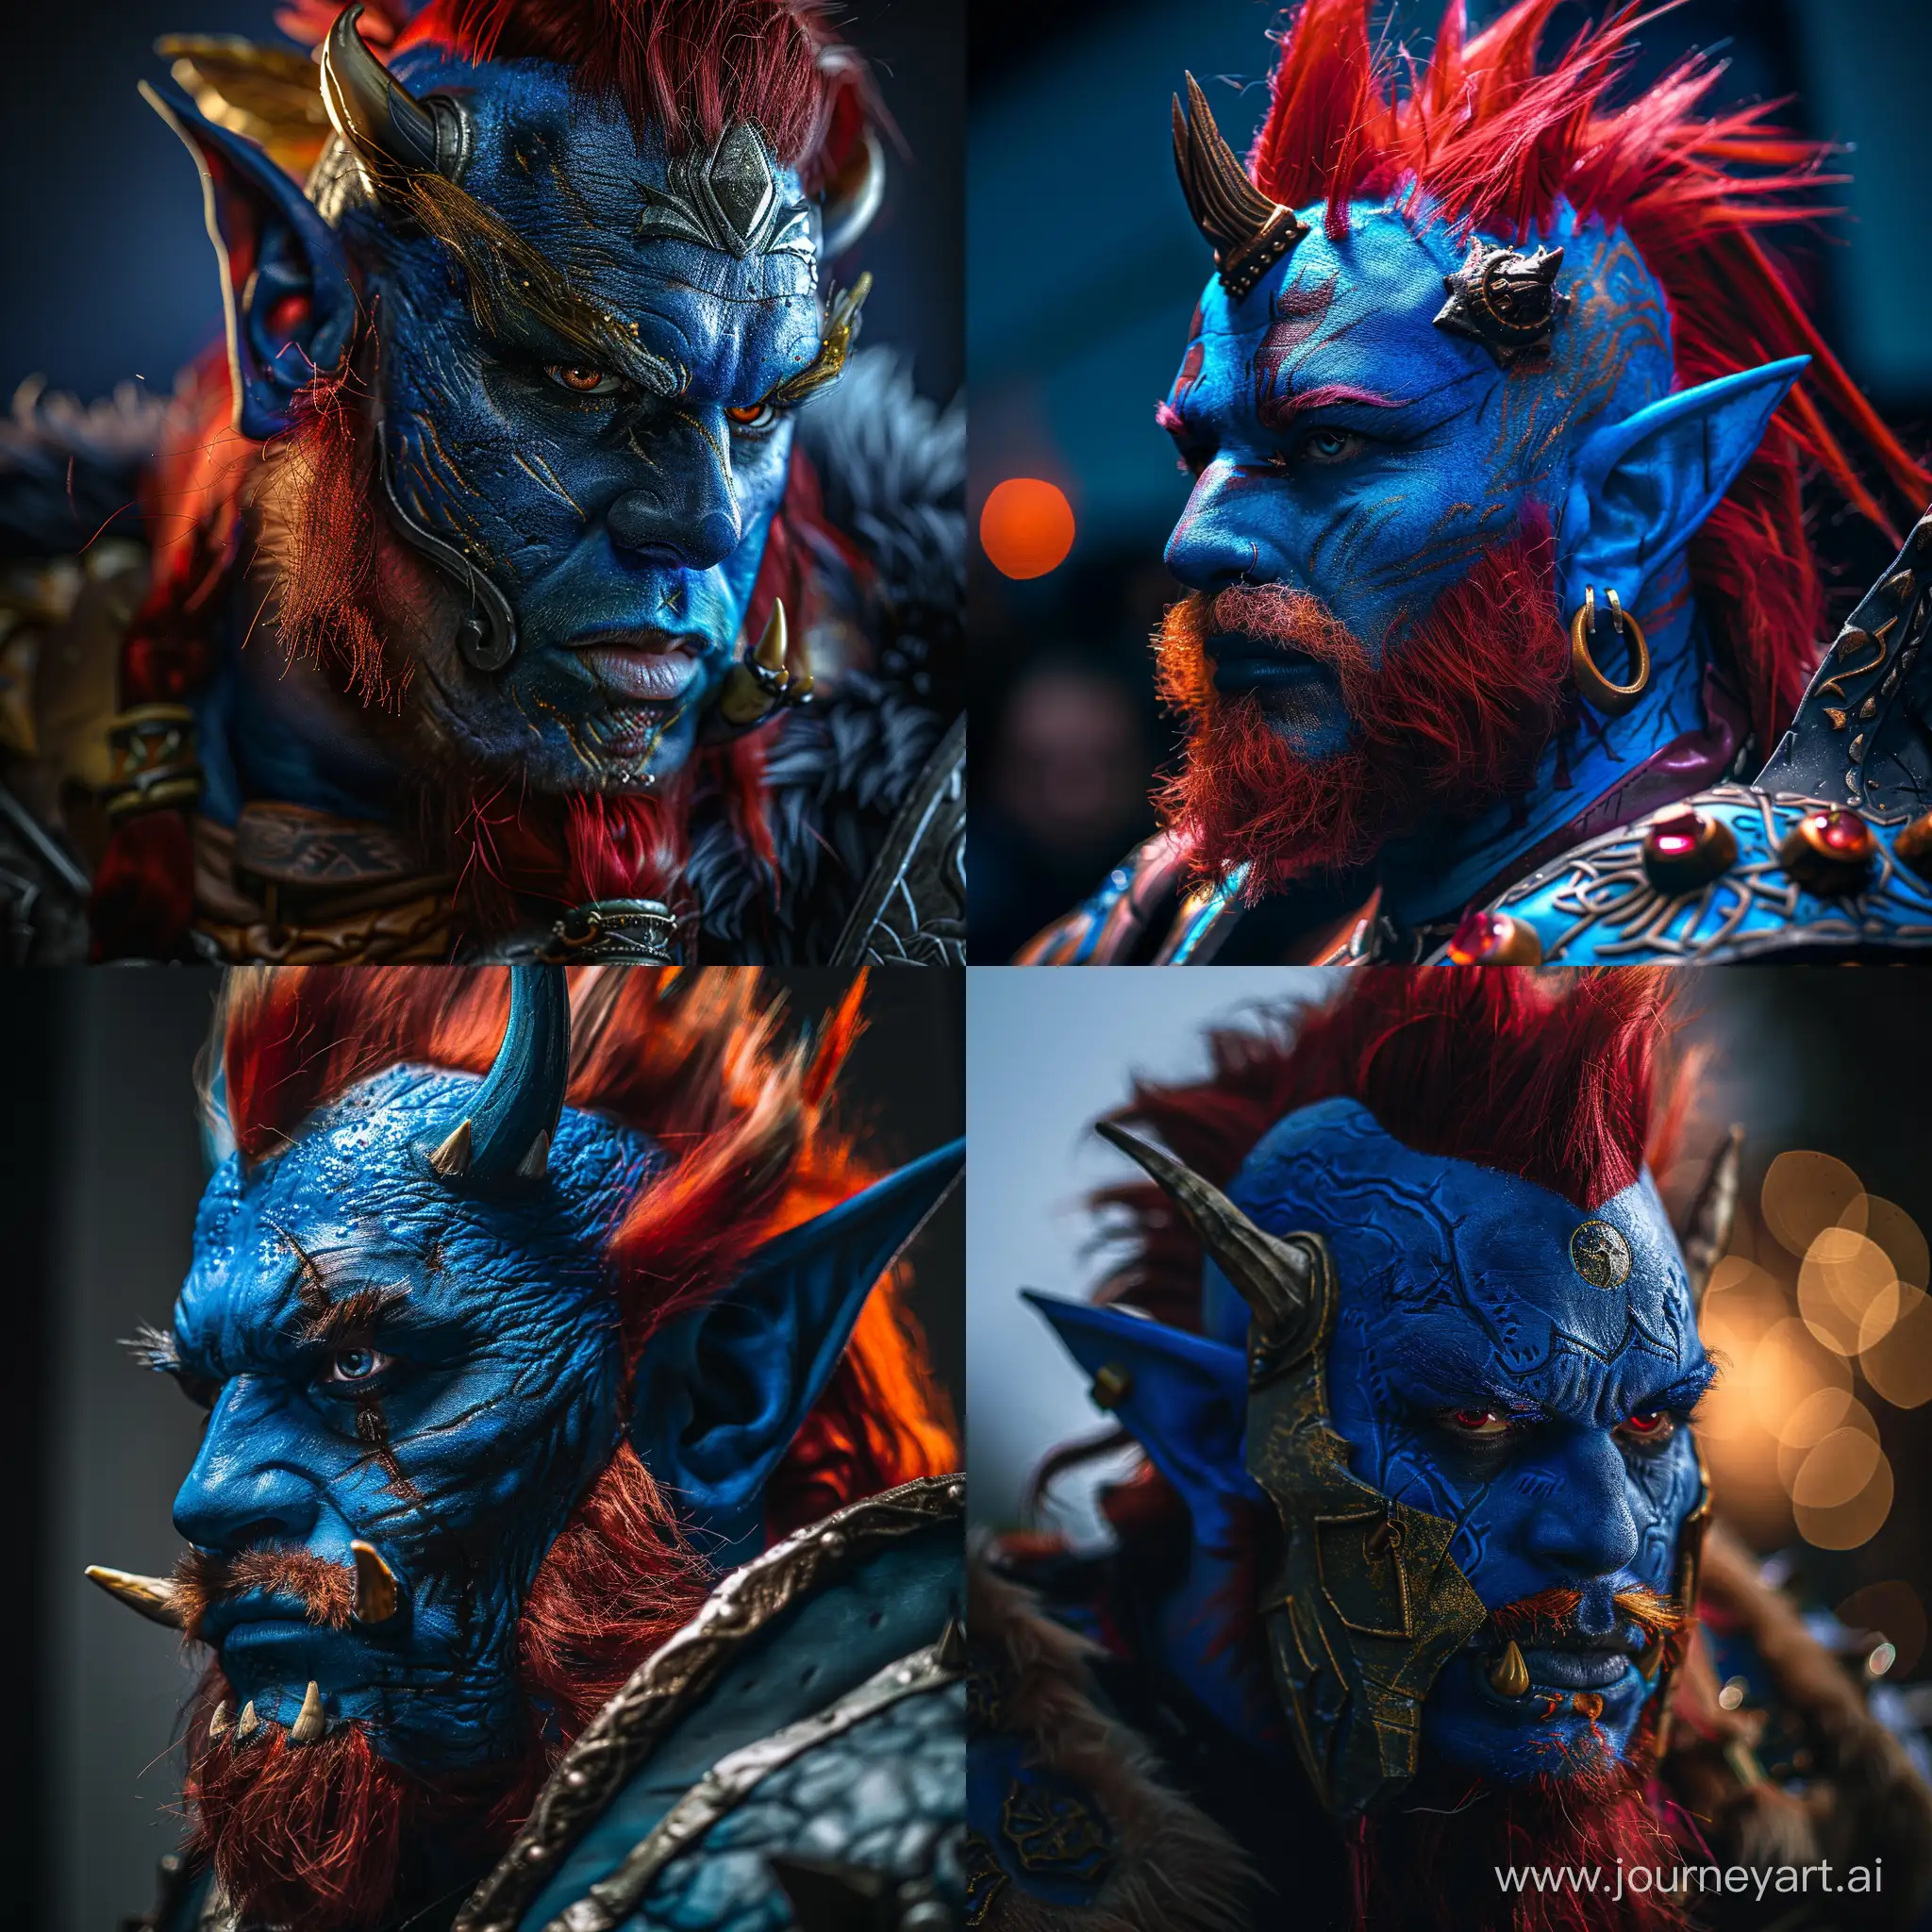 Vol'jin character from the game World of Warcraft, male cosplay, blue skin, red hair, ultra realistic, hyber detailed, modelcore, portrait photo. use sony a7 II camera with an 30mm lens fat F.1.2 aperture setting to blur the background and isolate the subject. use distinctive lighting on the subjects shot. The image should be shot in ultra-high resolution. --v 6